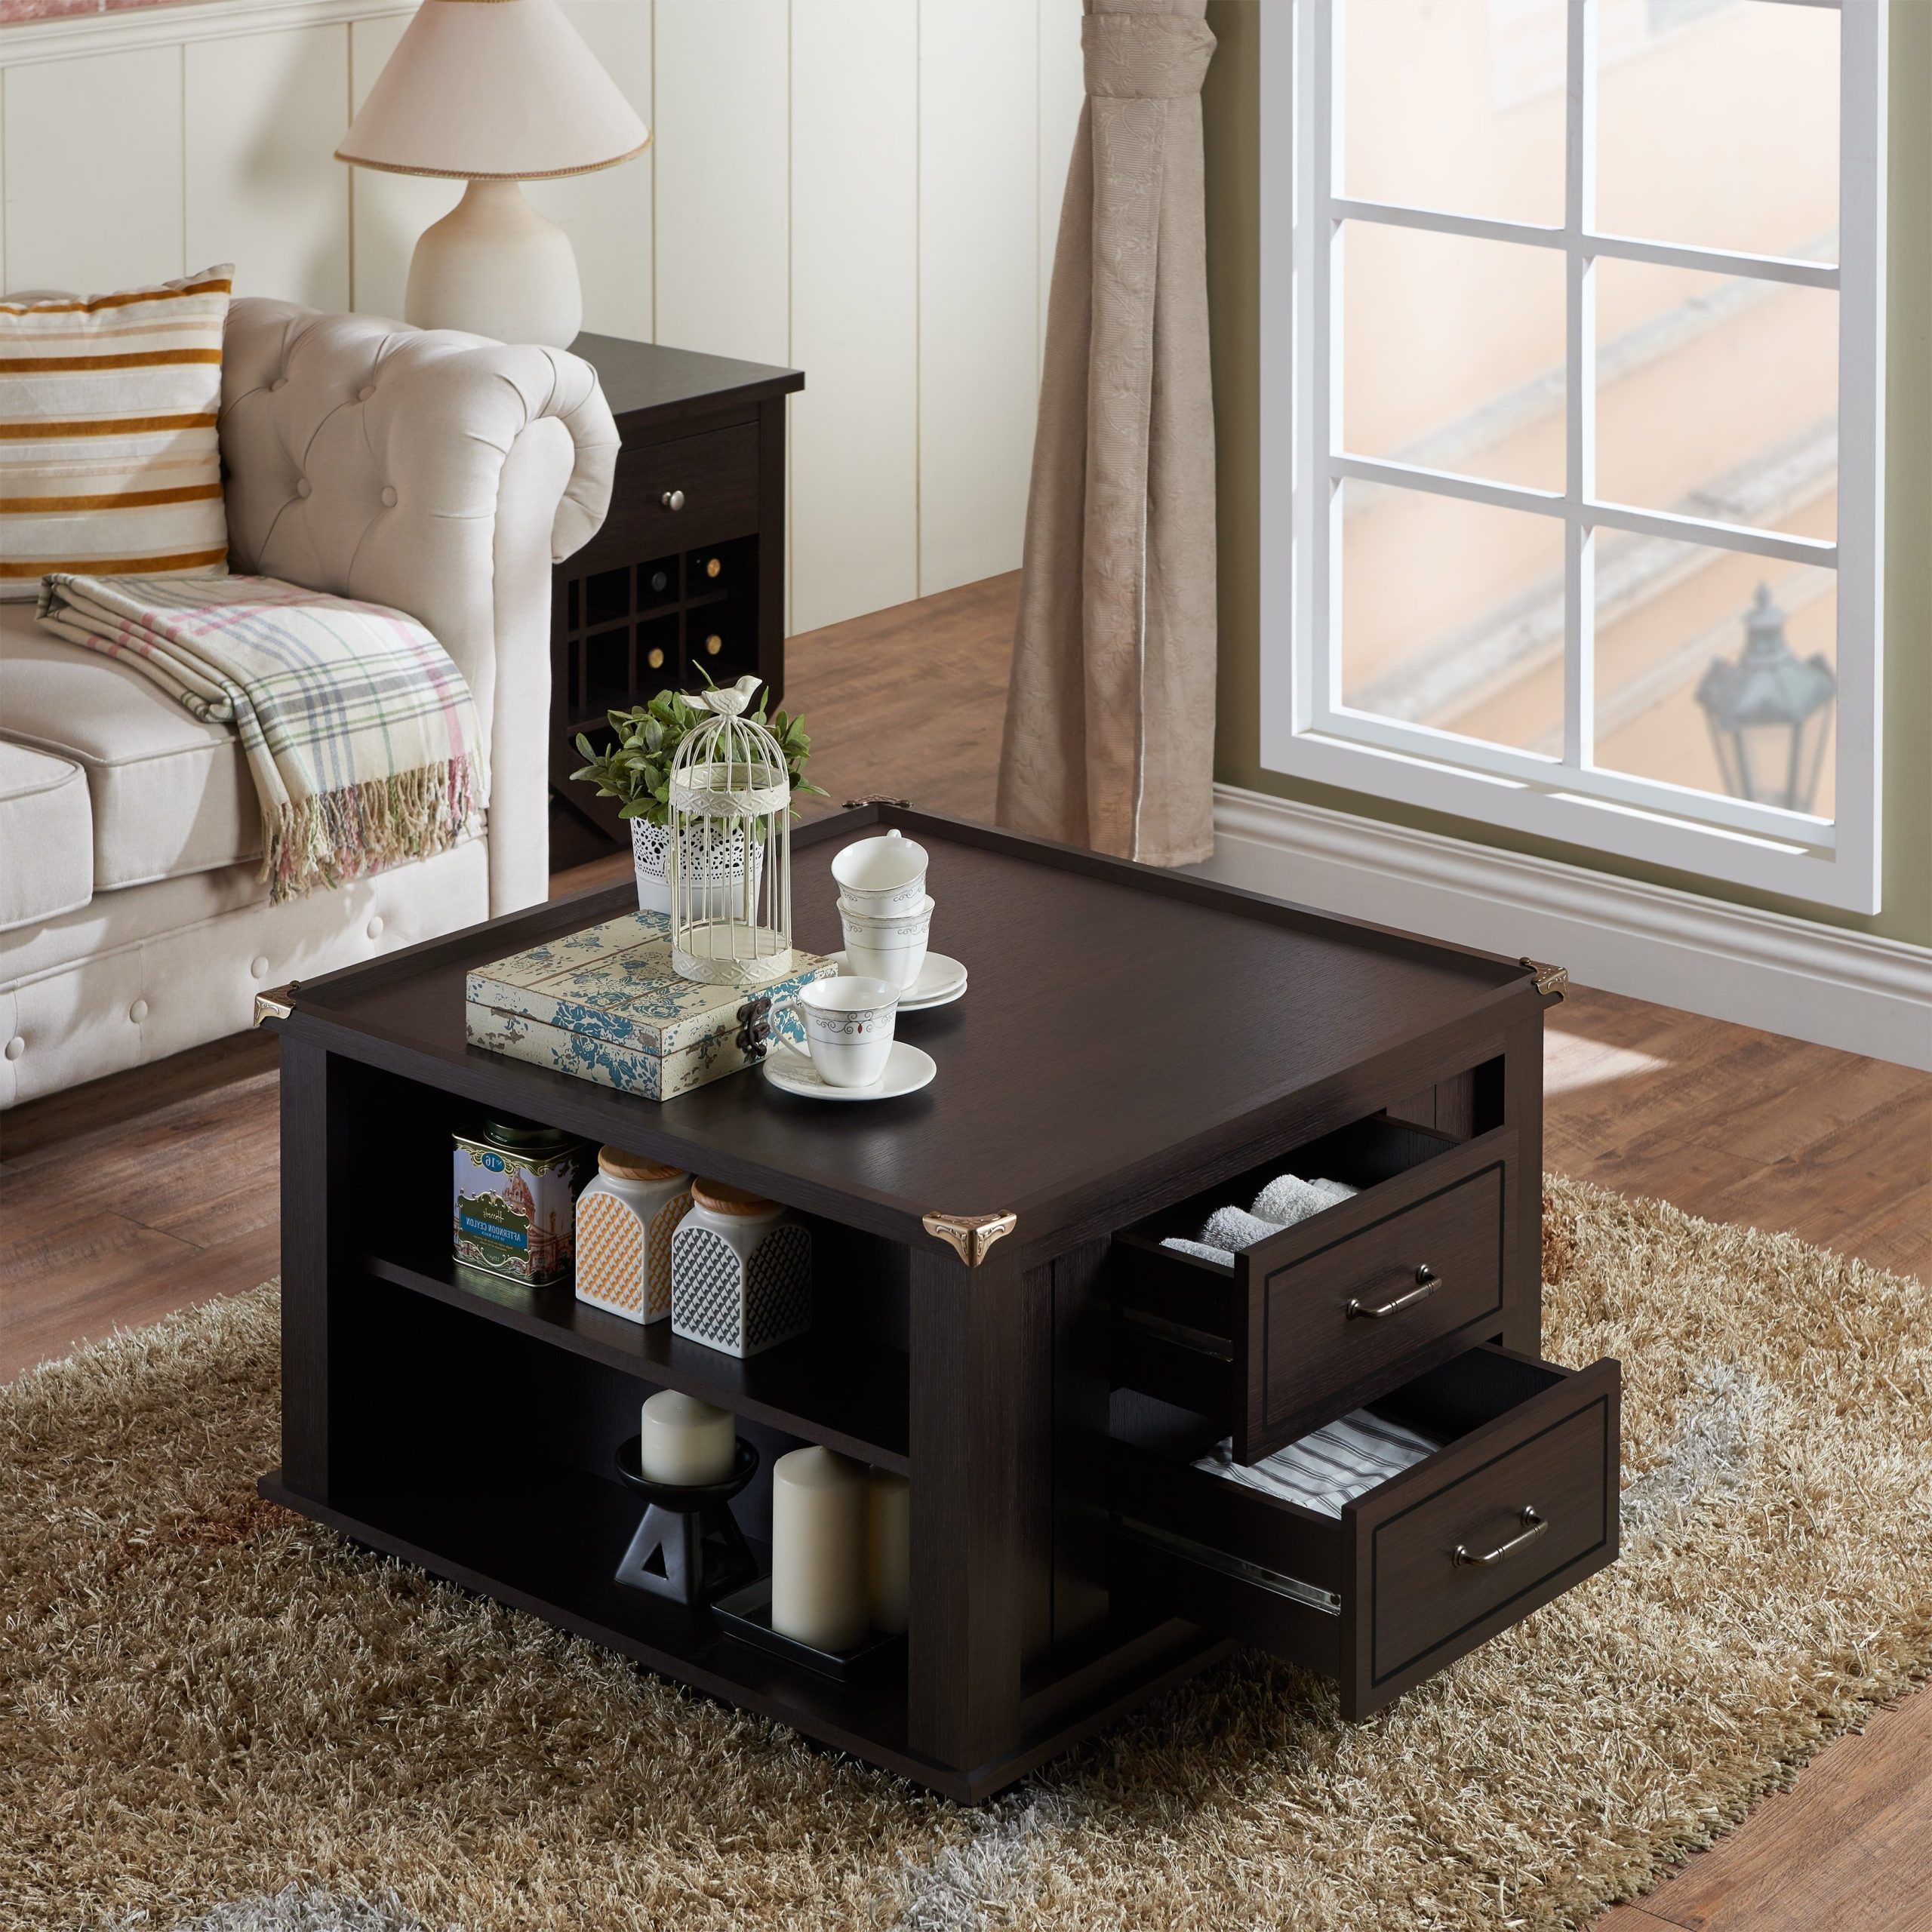 Our Best Living Room Furniture Deals | Coffee Table, Furniture Of Inside Transitional Square Coffee Tables (Gallery 5 of 20)